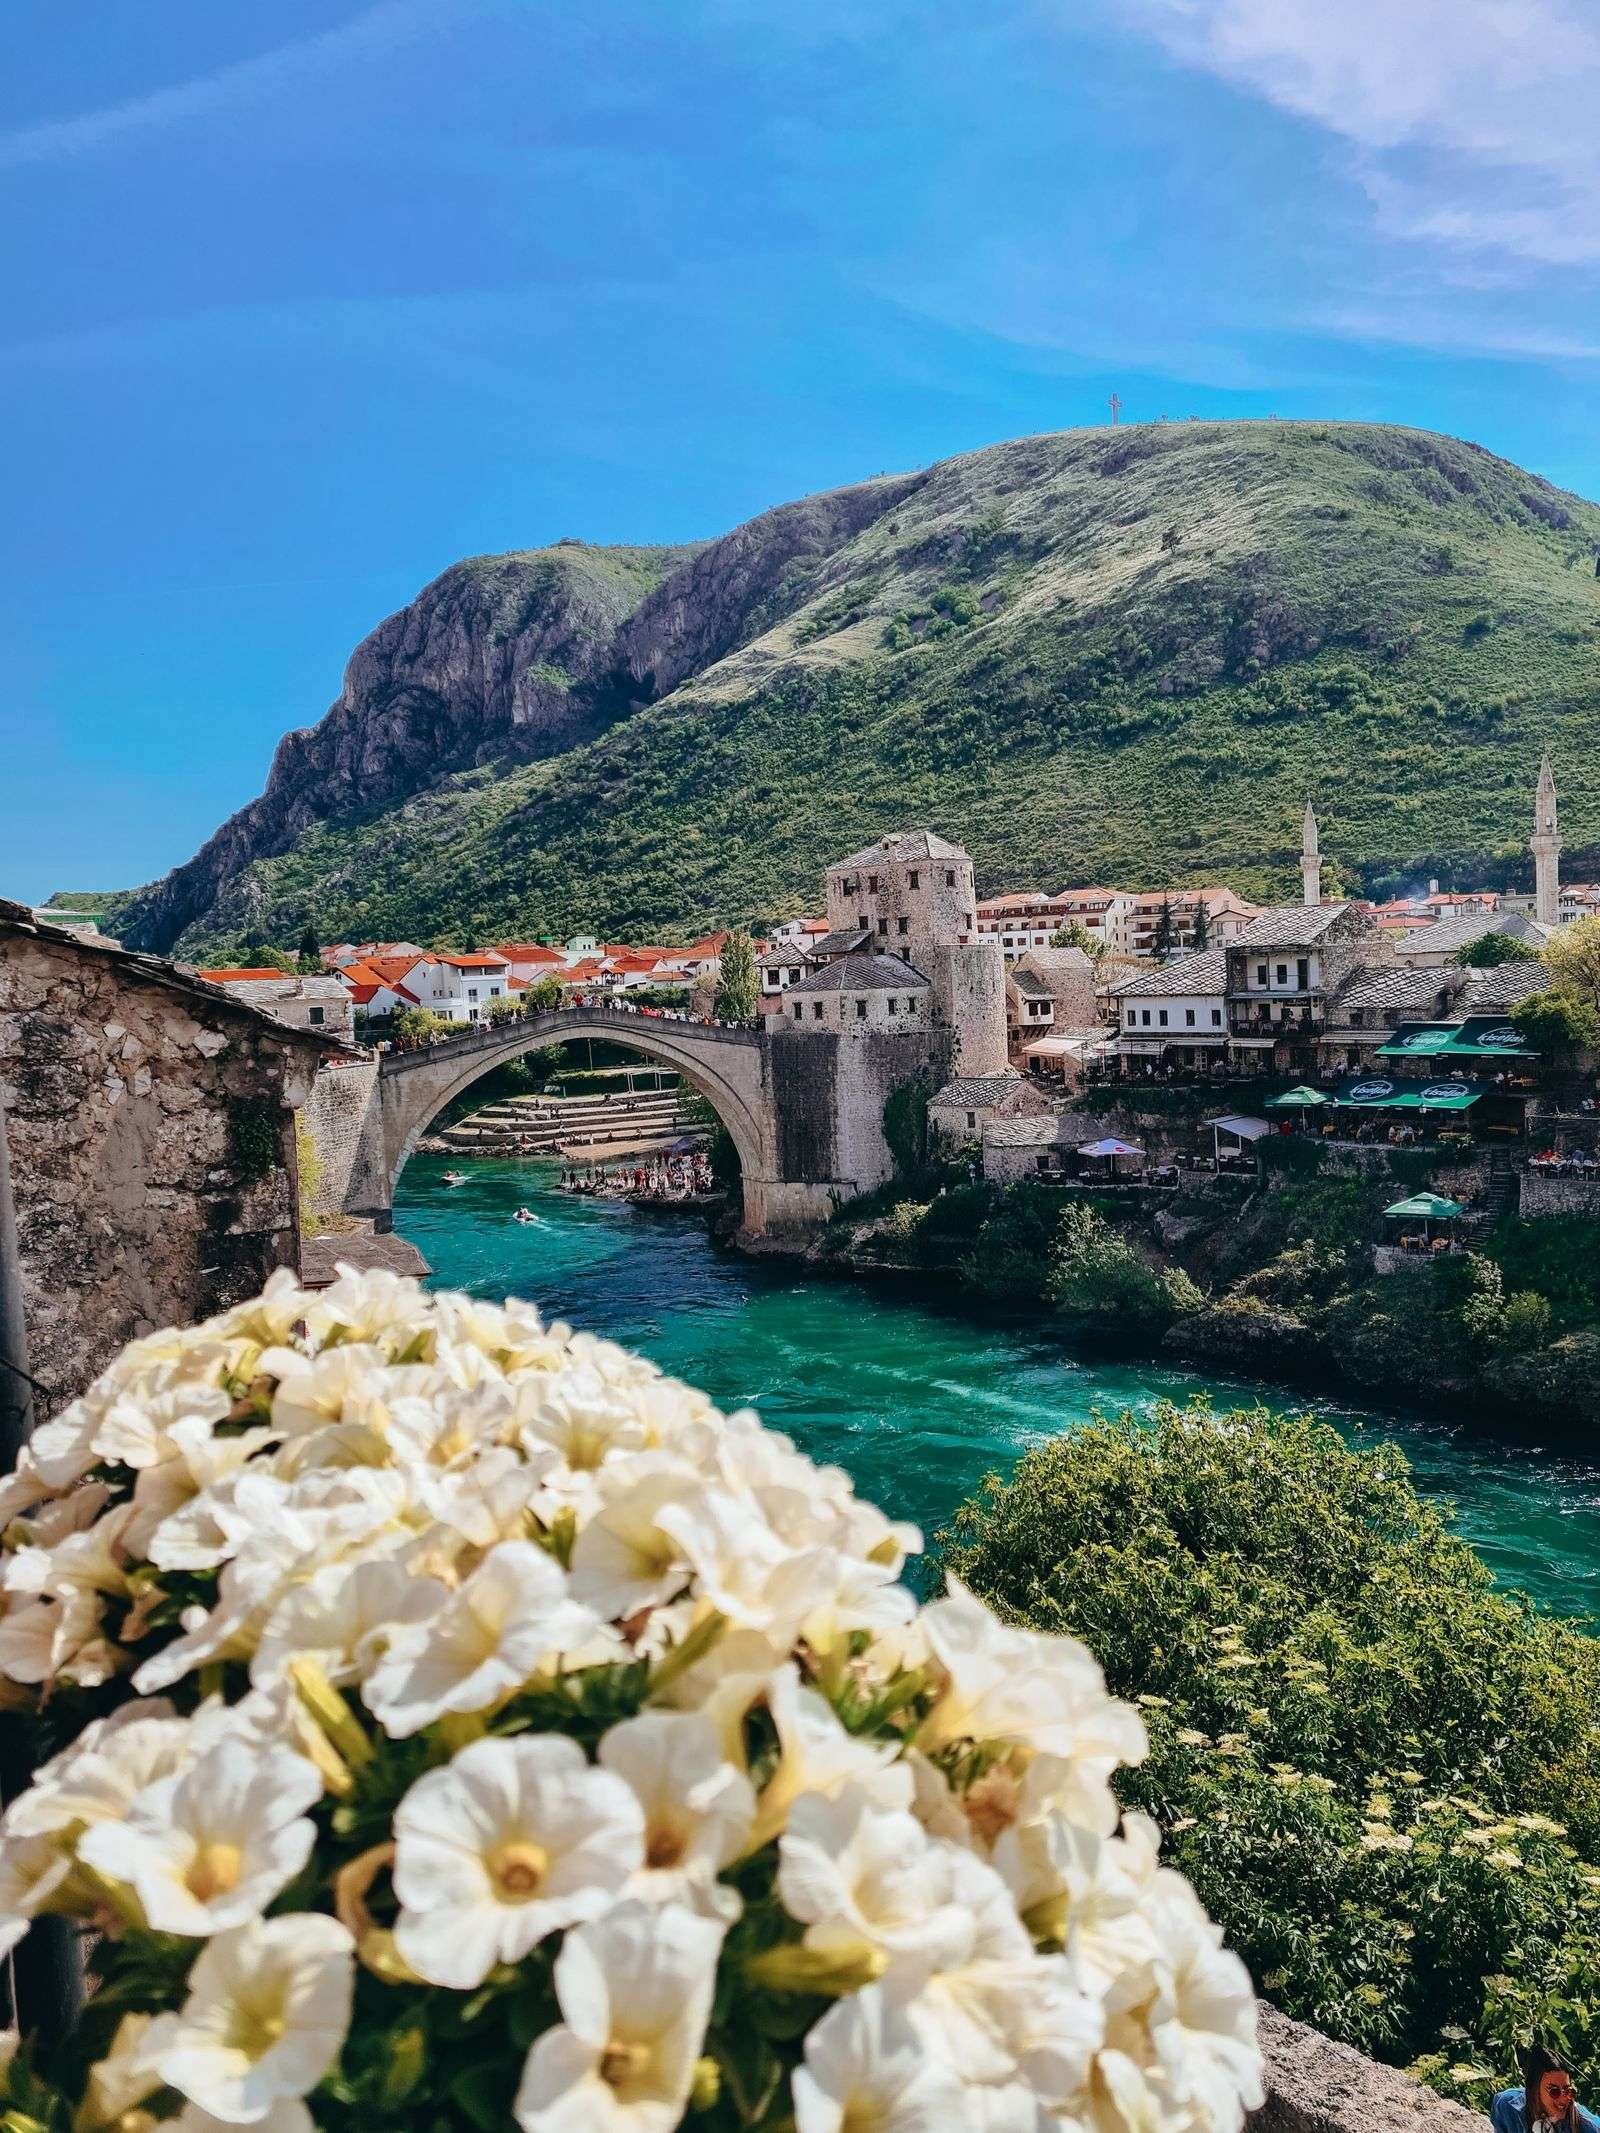 A closeup picture of white flowers with a stone bridge crossing over a blue river and many stone buildings in the background next to a large hill